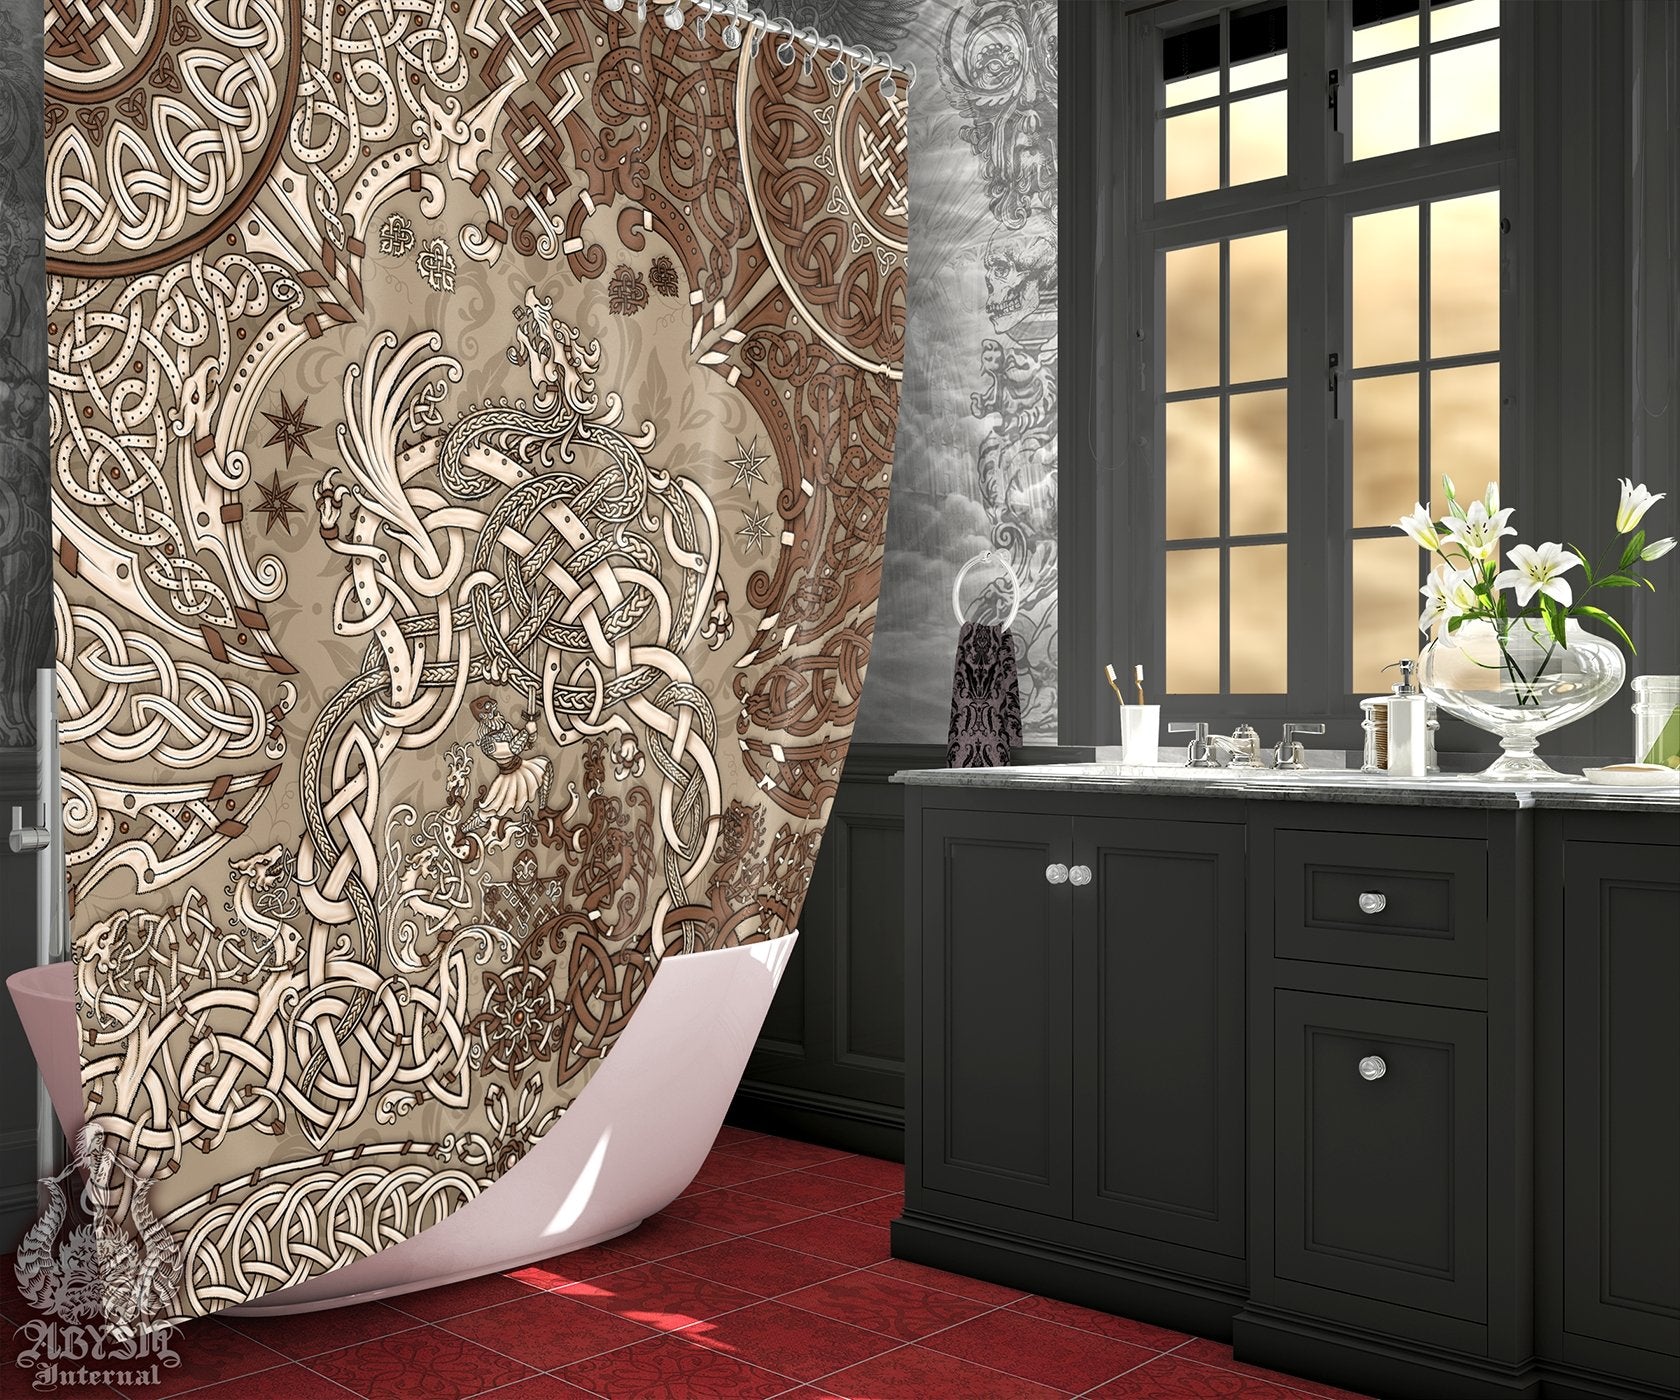 Viking Shower Curtain, Bathroom Decor, Nordic & Norse Art, Dragon Fafnir, Eclectic and Funky Home - Cream - Abysm Internal